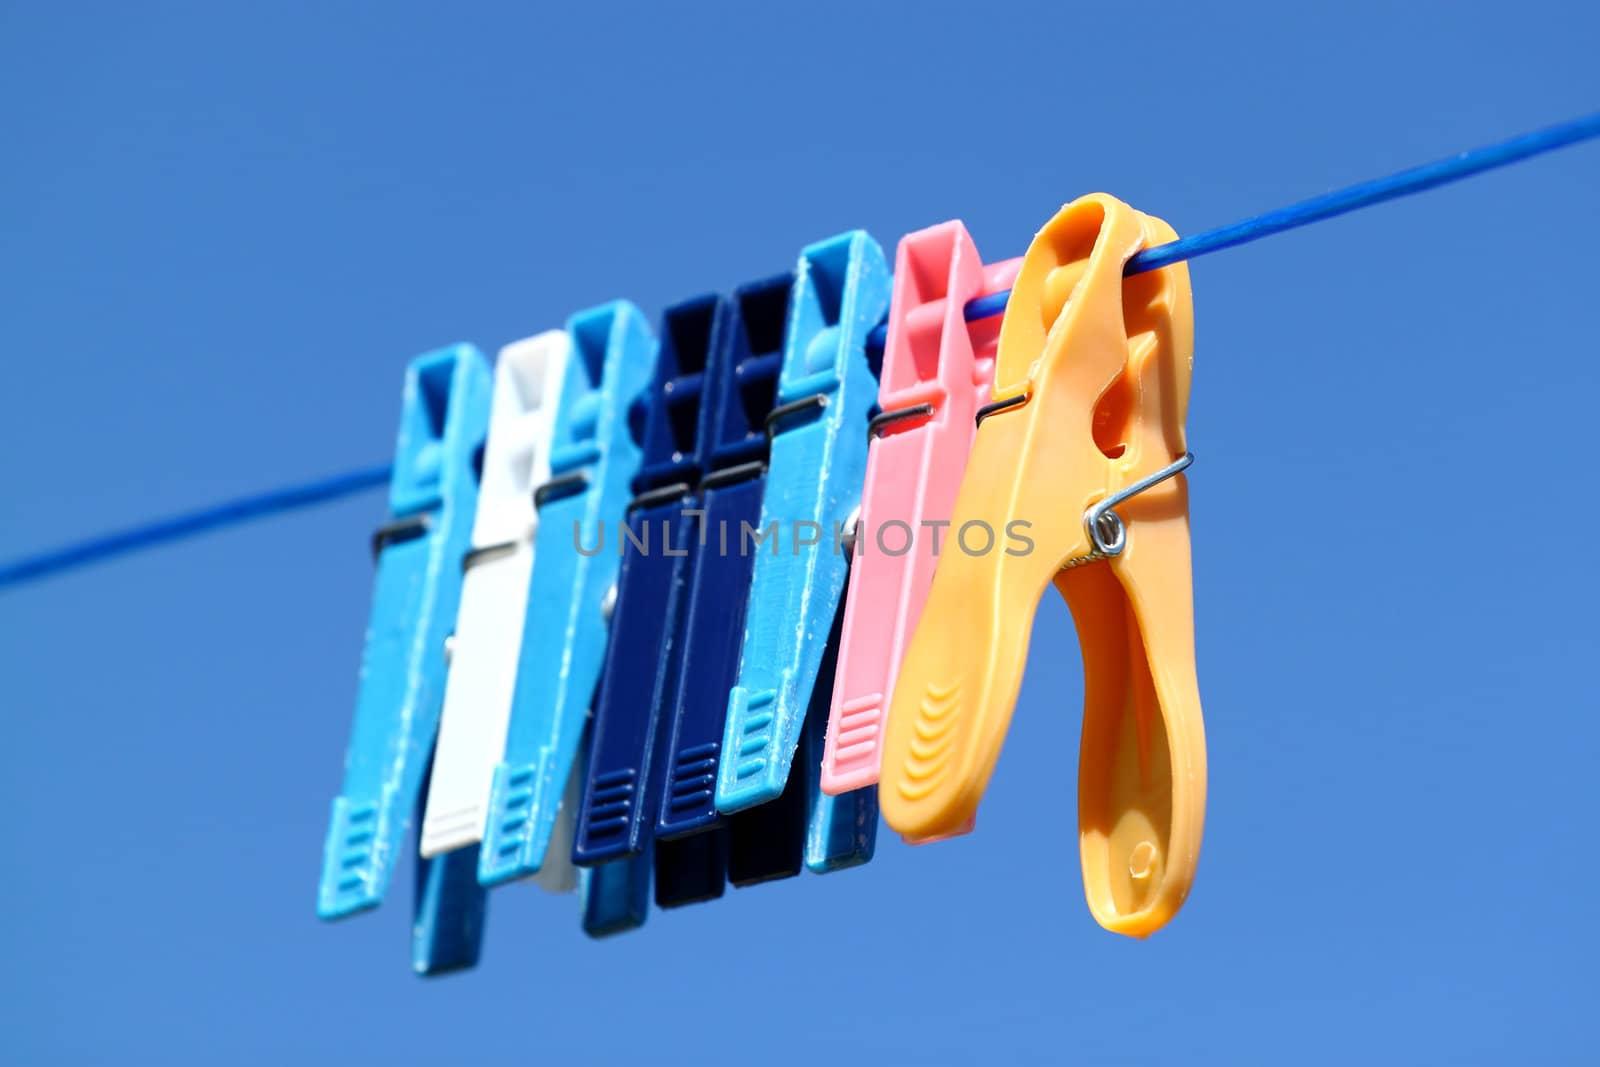 cloth pegs with a under the clear blue sky